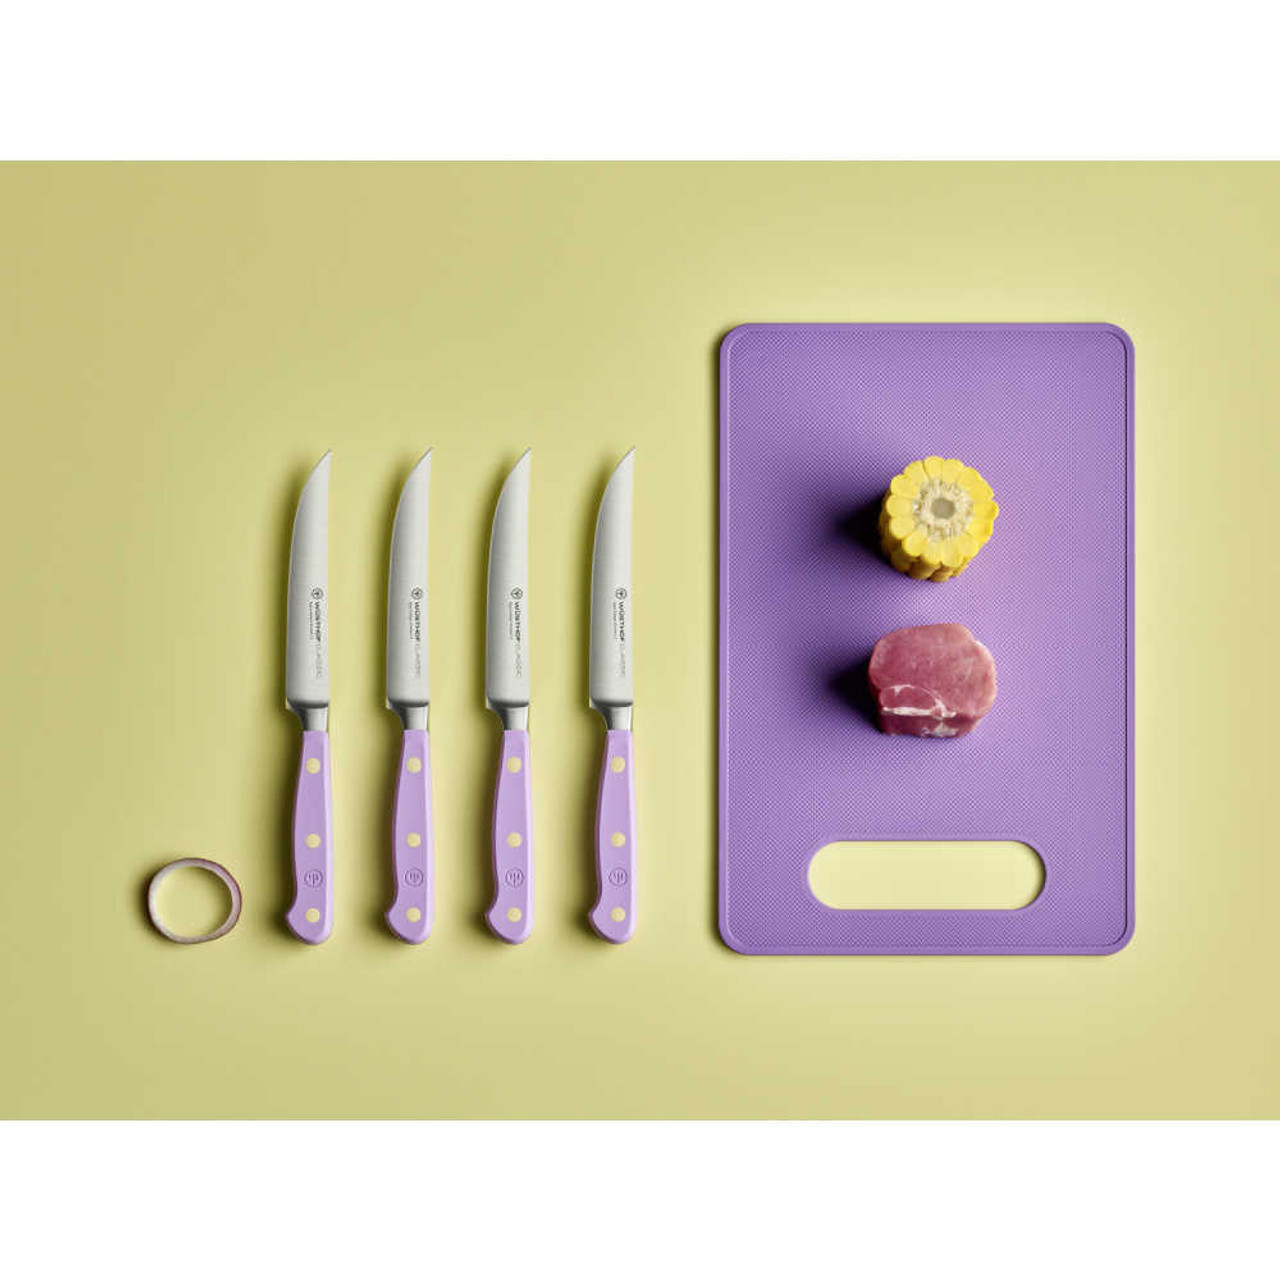 https://cdn11.bigcommerce.com/s-hccytny0od/images/stencil/1280x1280/products/5390/23455/Wusthof_Classic_Color_4-Piece_Steak_Knife_Set_Purple_Yam_1__27567.1682091979.jpg?c=2?imbypass=on